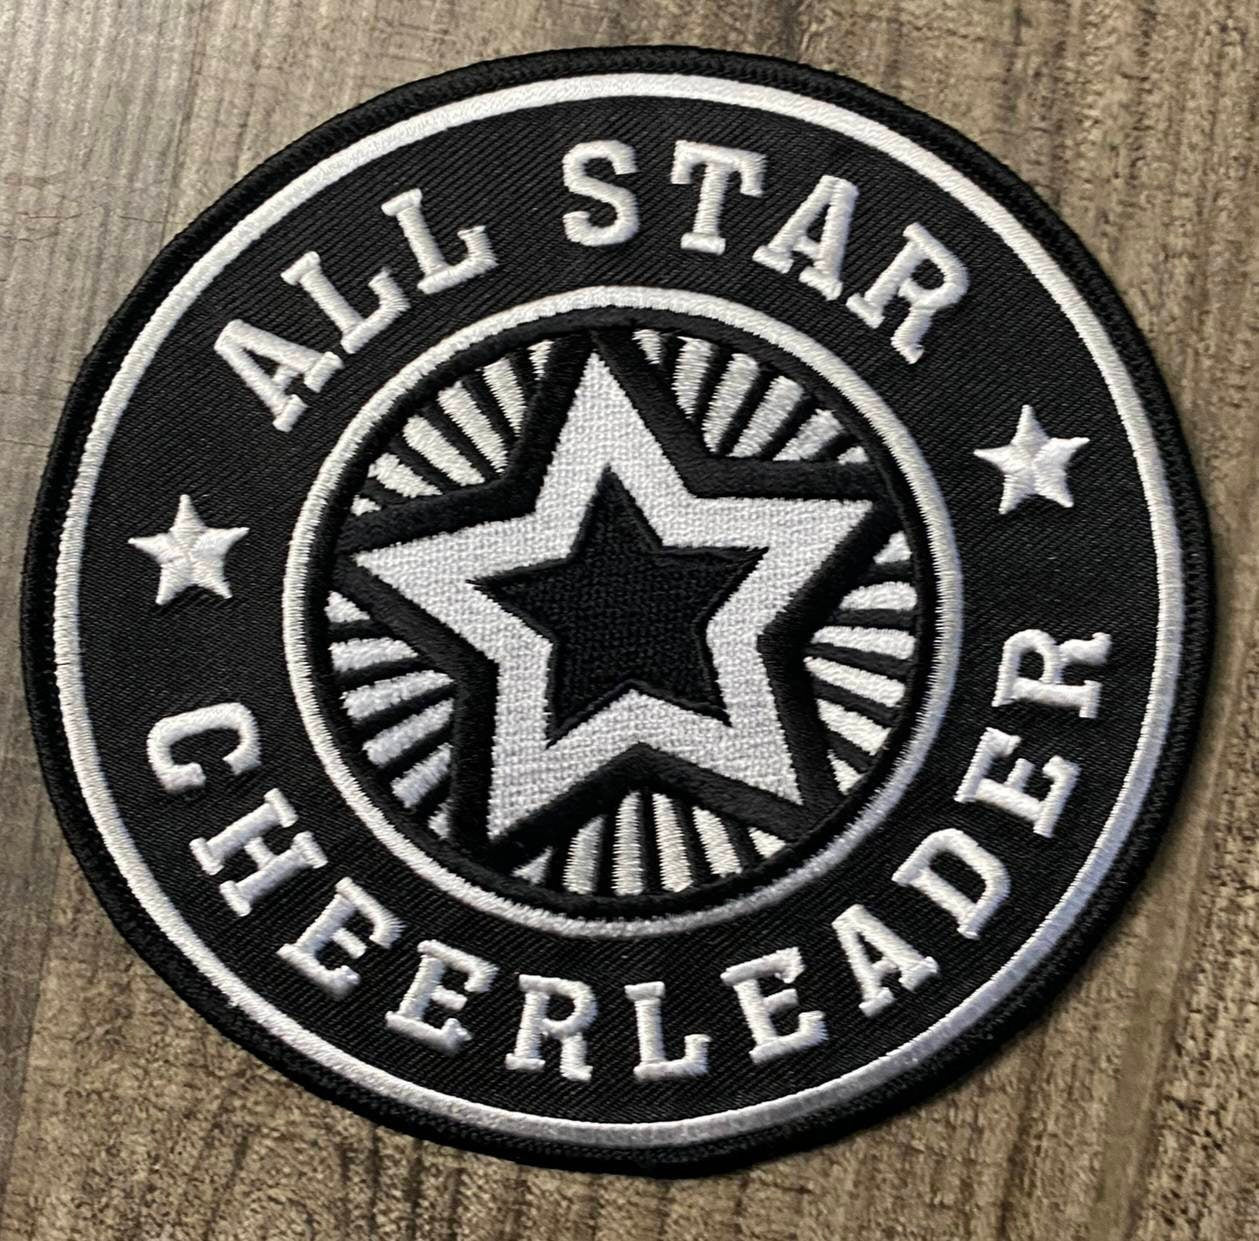 Embroidered "All-Star Cheerleader" Black/White, Cheerleading Patch, Iron-on Applique for Jackets, Camo, & Bags, Size 6", Cheerleader Patch